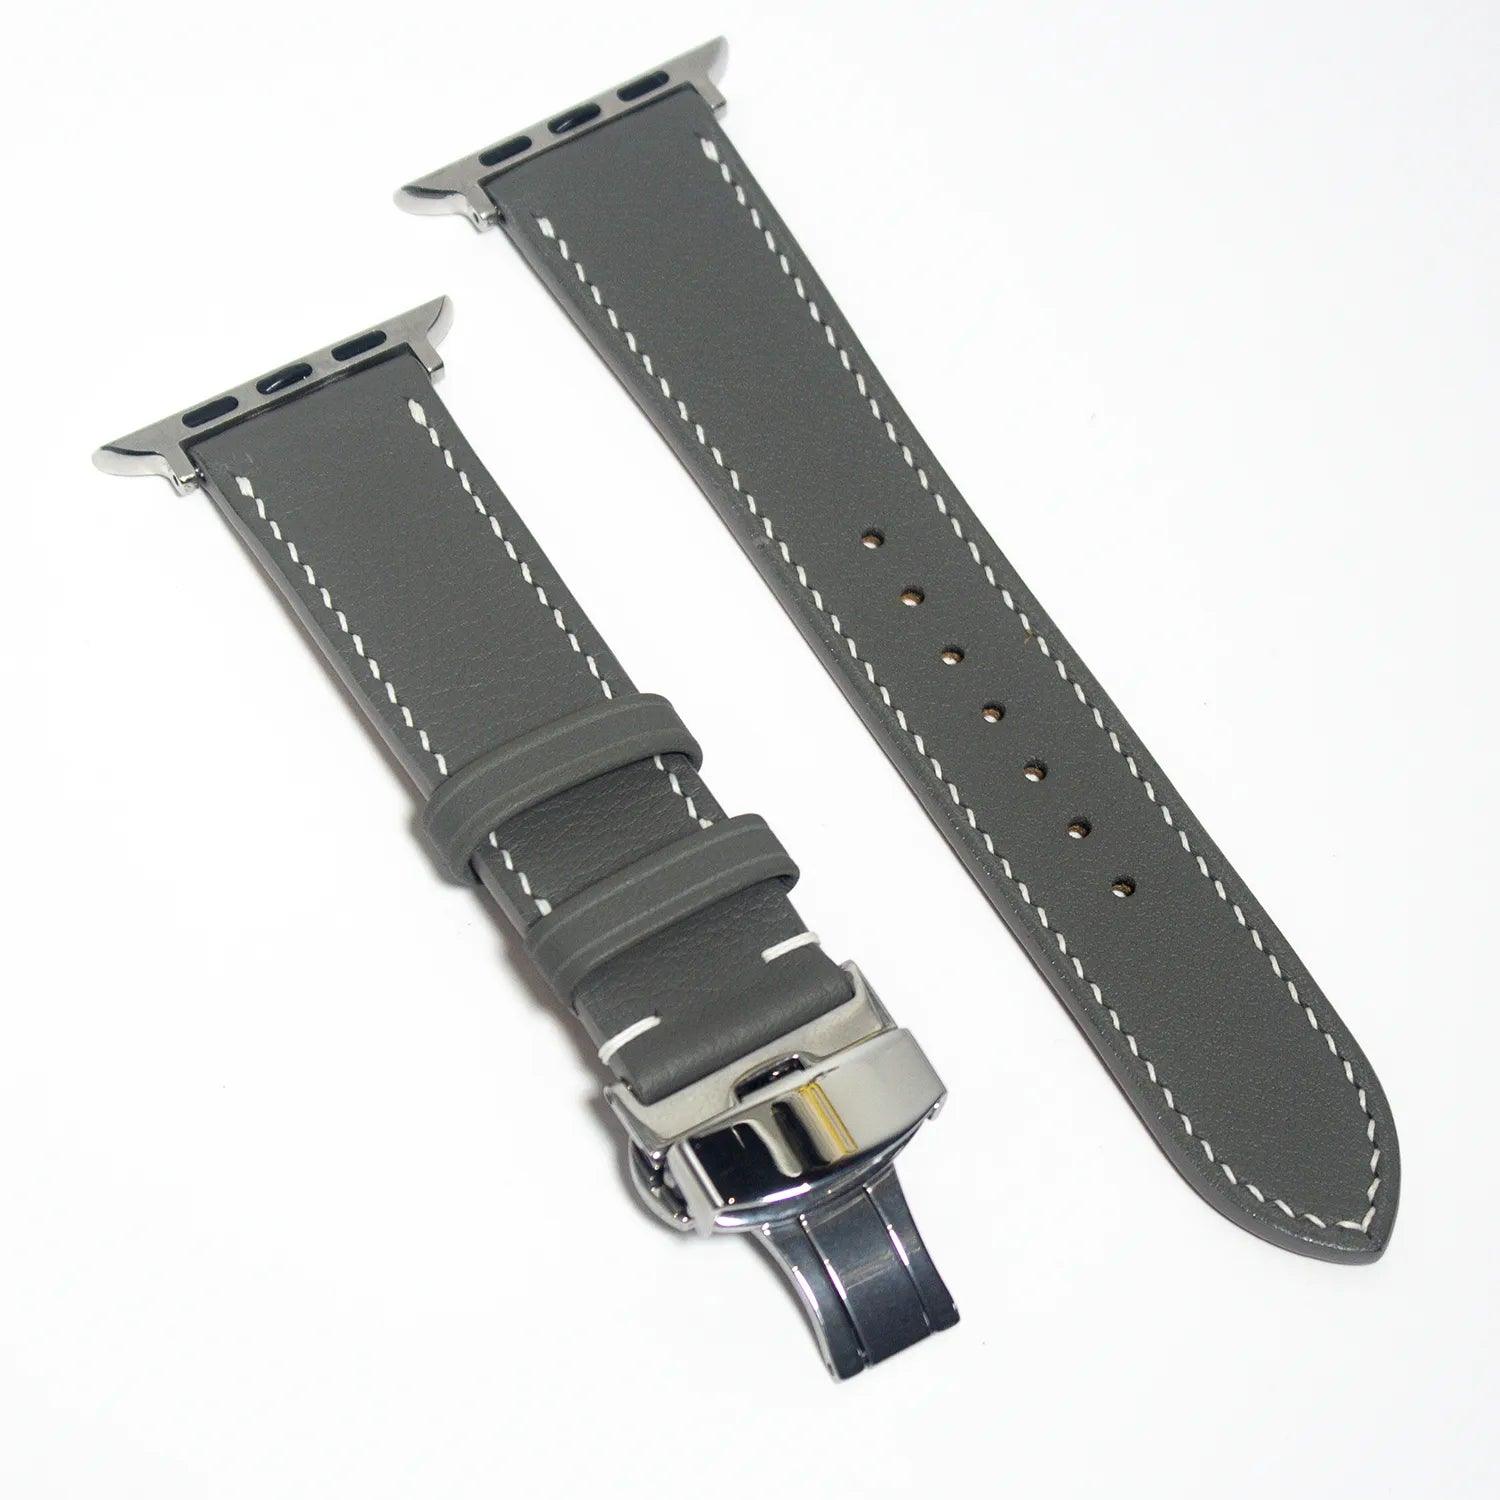 Luxurious leather Apple Watch band in grey Swift leather, perfect blend of elegance and resilience.